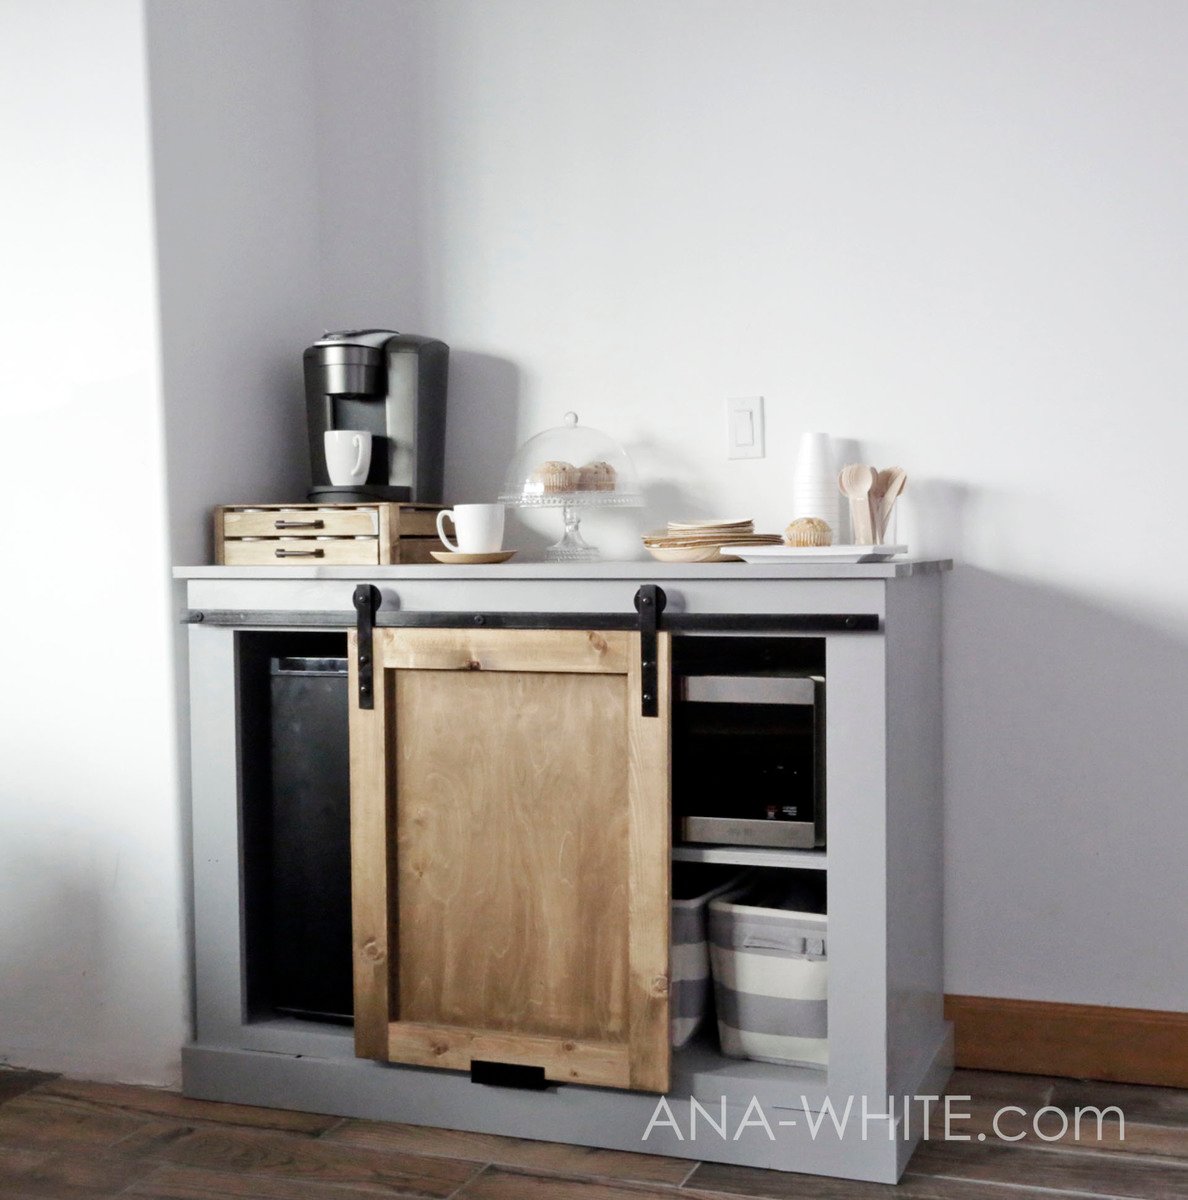 Ana White | Barn Door Cabinet with Mini Fridge and Microwave - DIY Projects